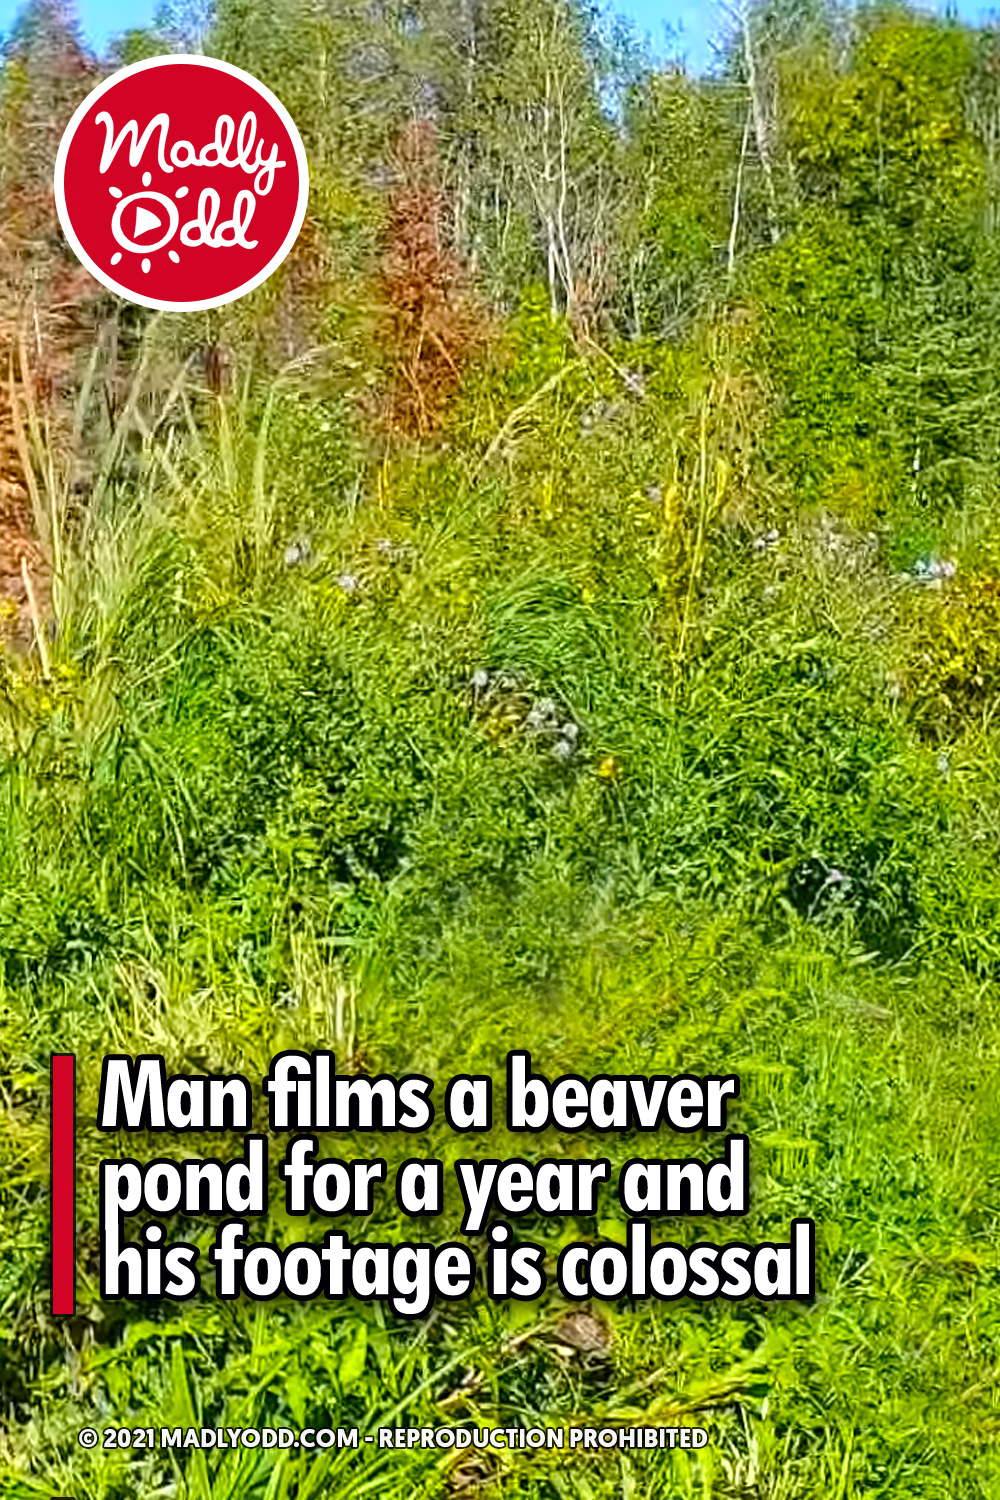 Man films a beaver pond for a year and his footage is colossal